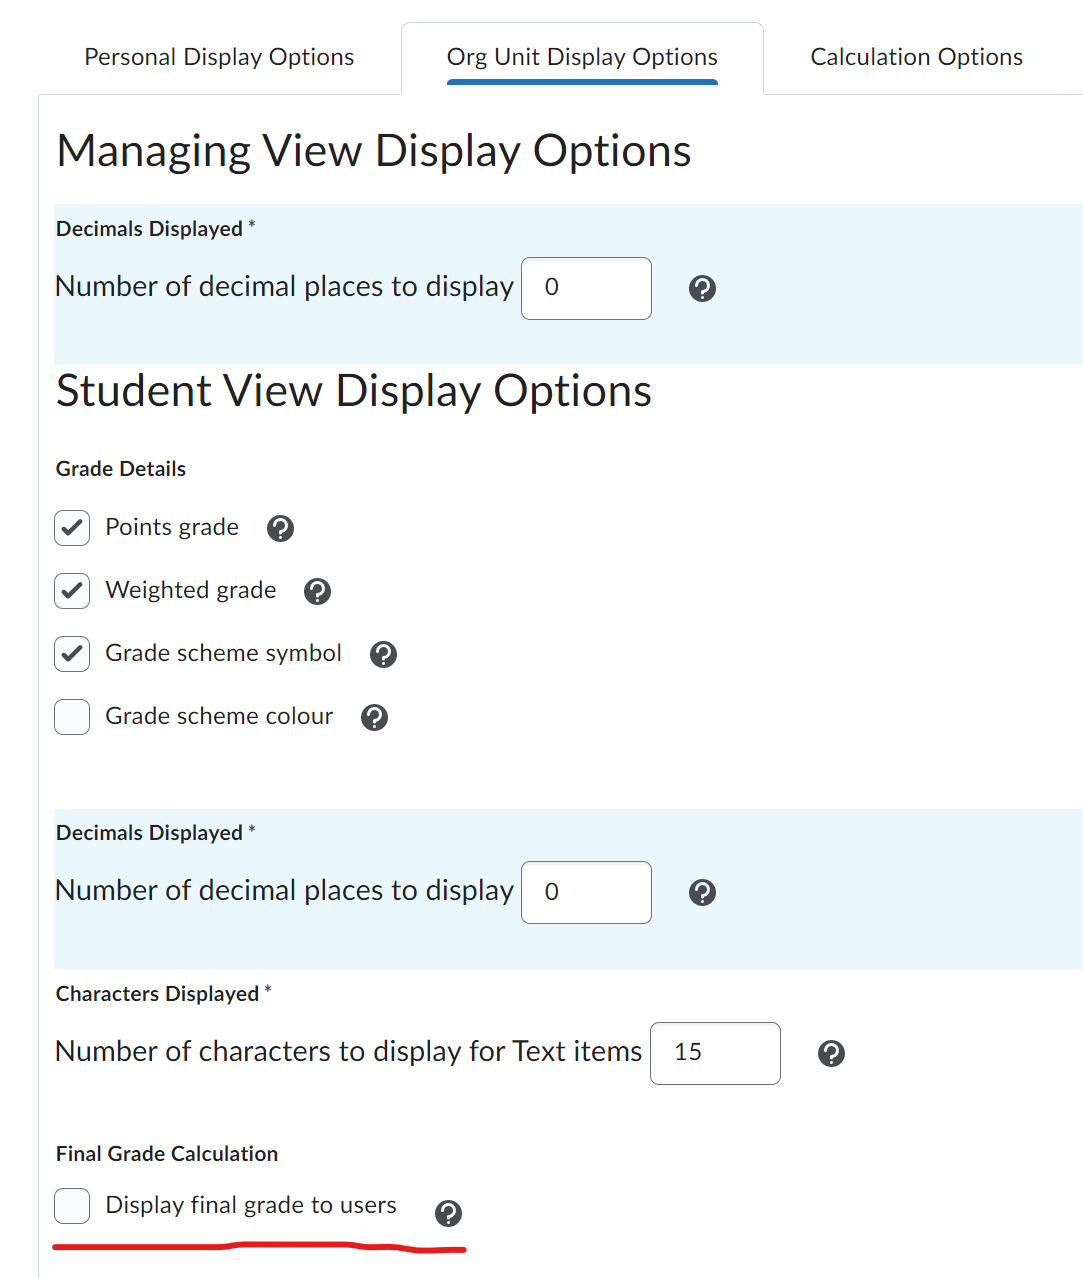 Display final grades to users is not checked